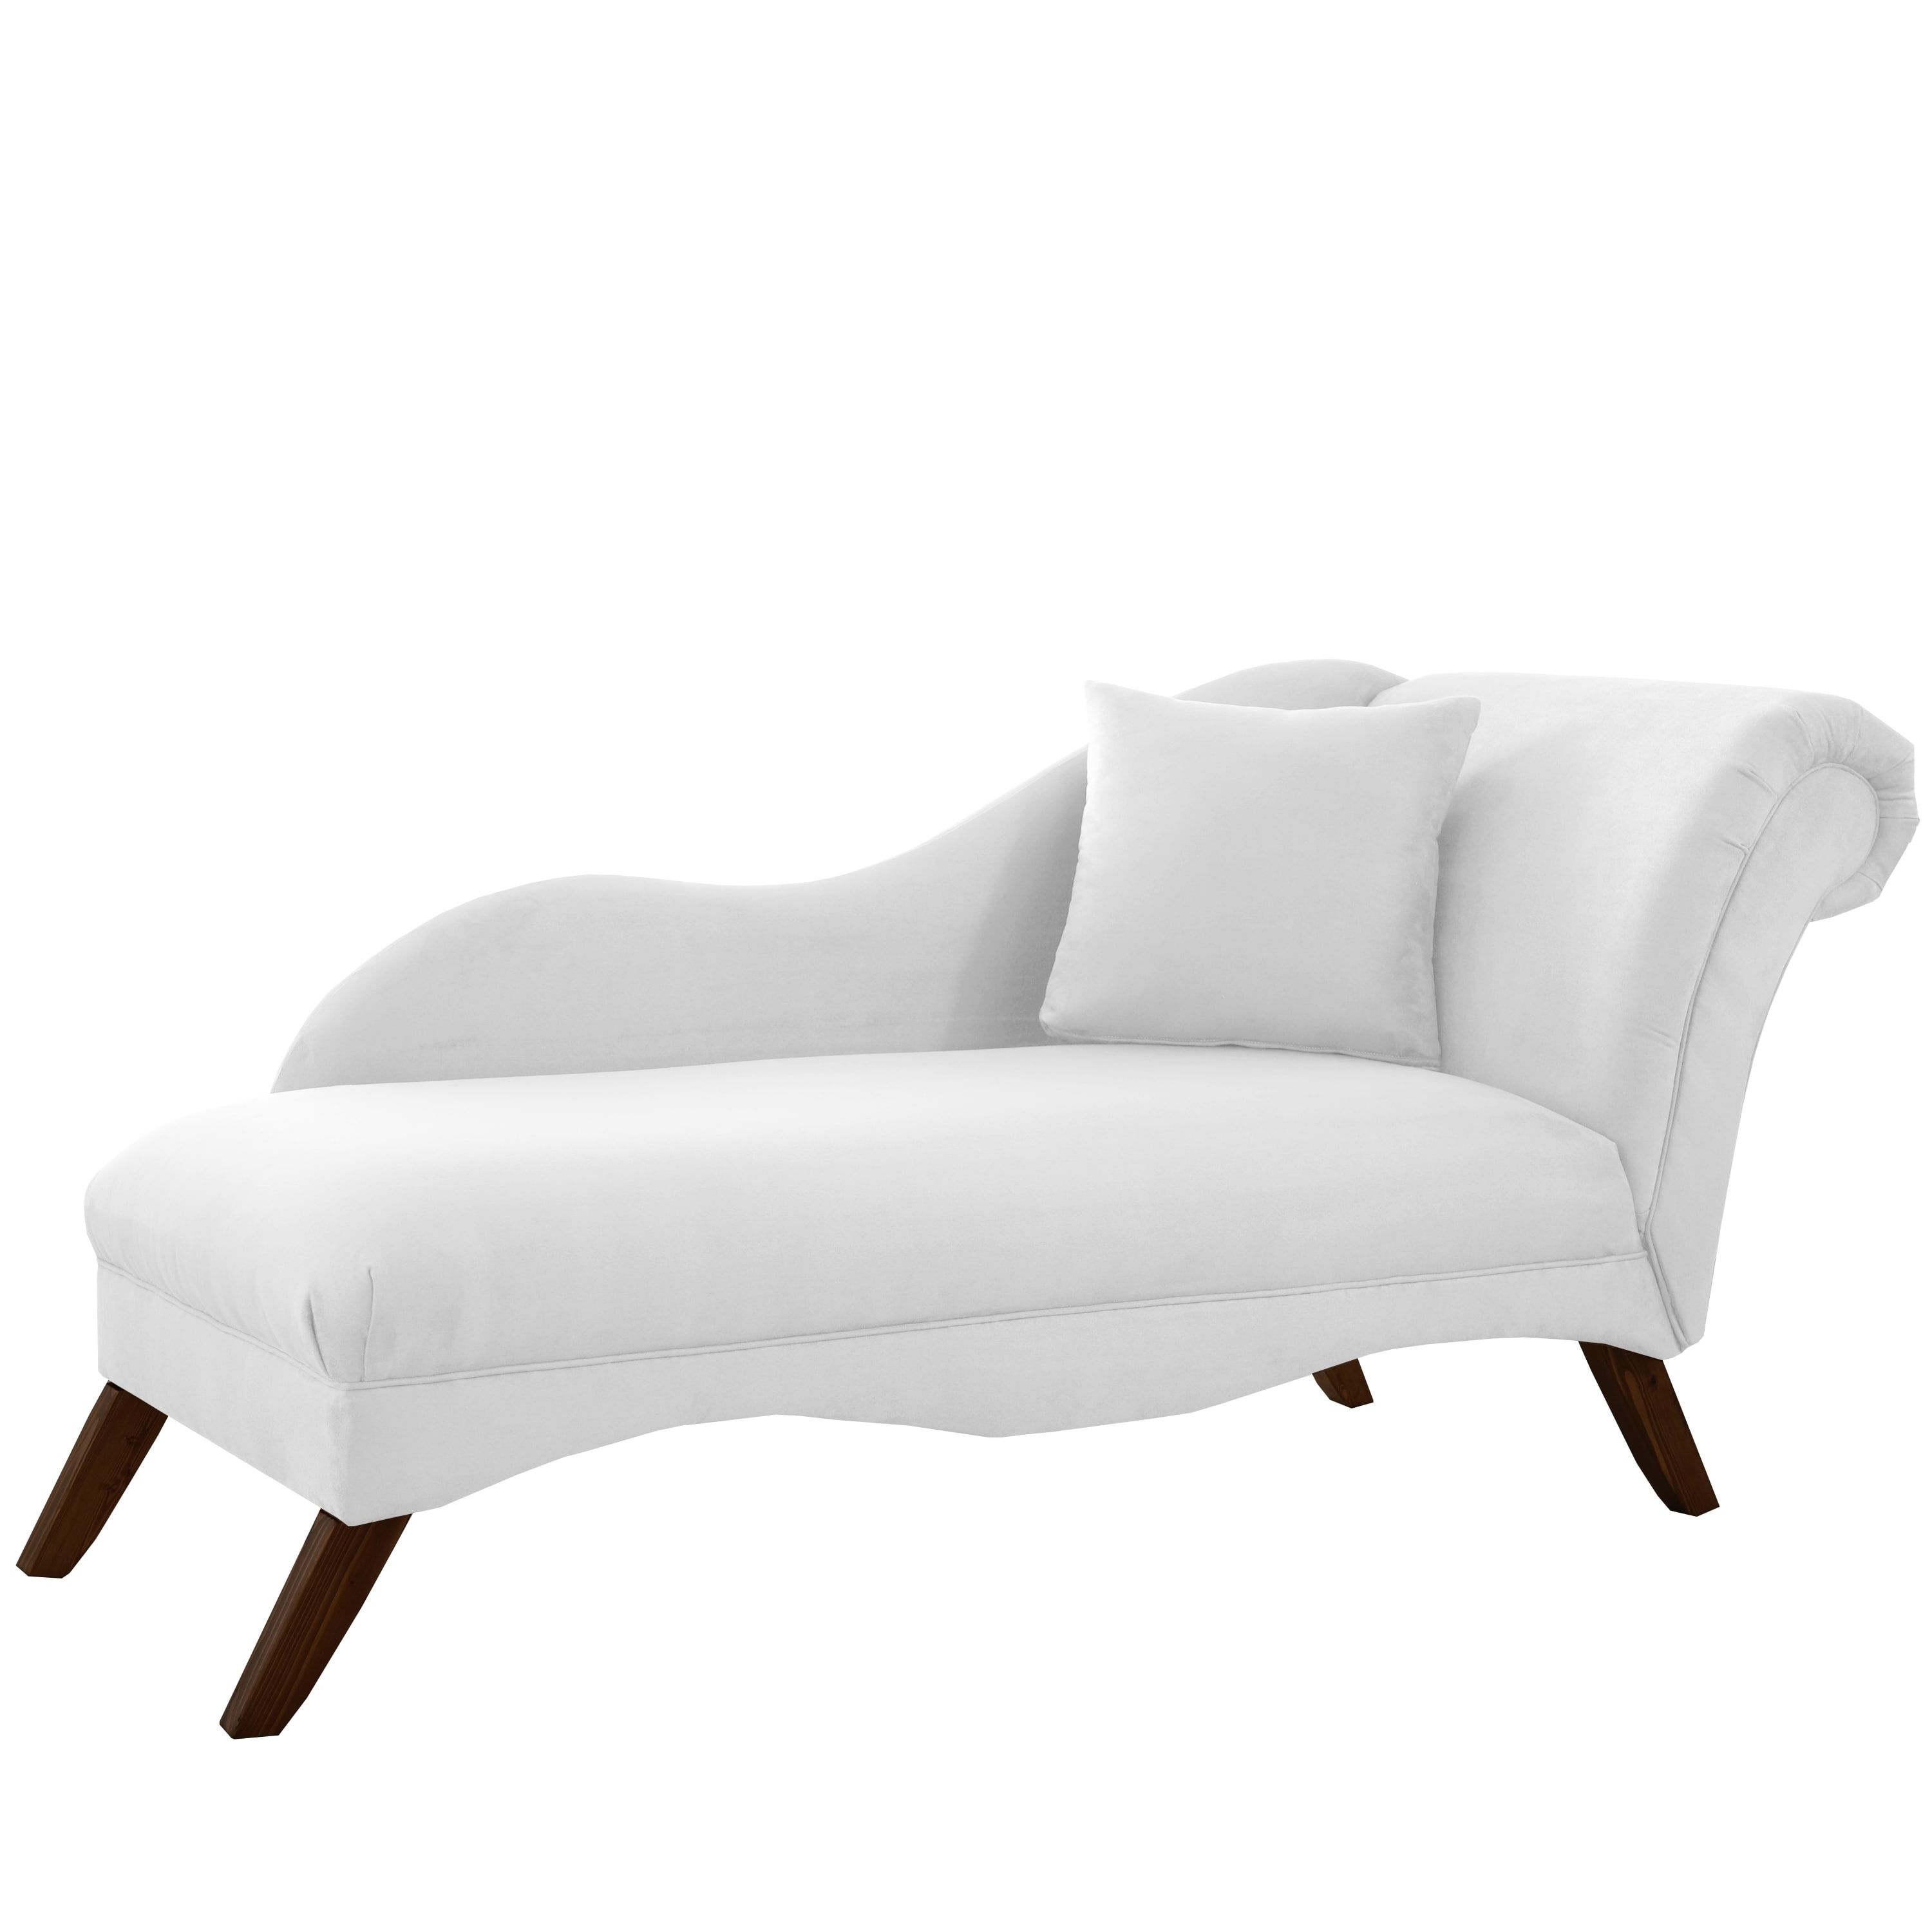 Skyline Chaise Lounges Inside Most Recently Released Skyline Furniture Chaise Lounge In Velvet White – Free Shipping (View 6 of 15)